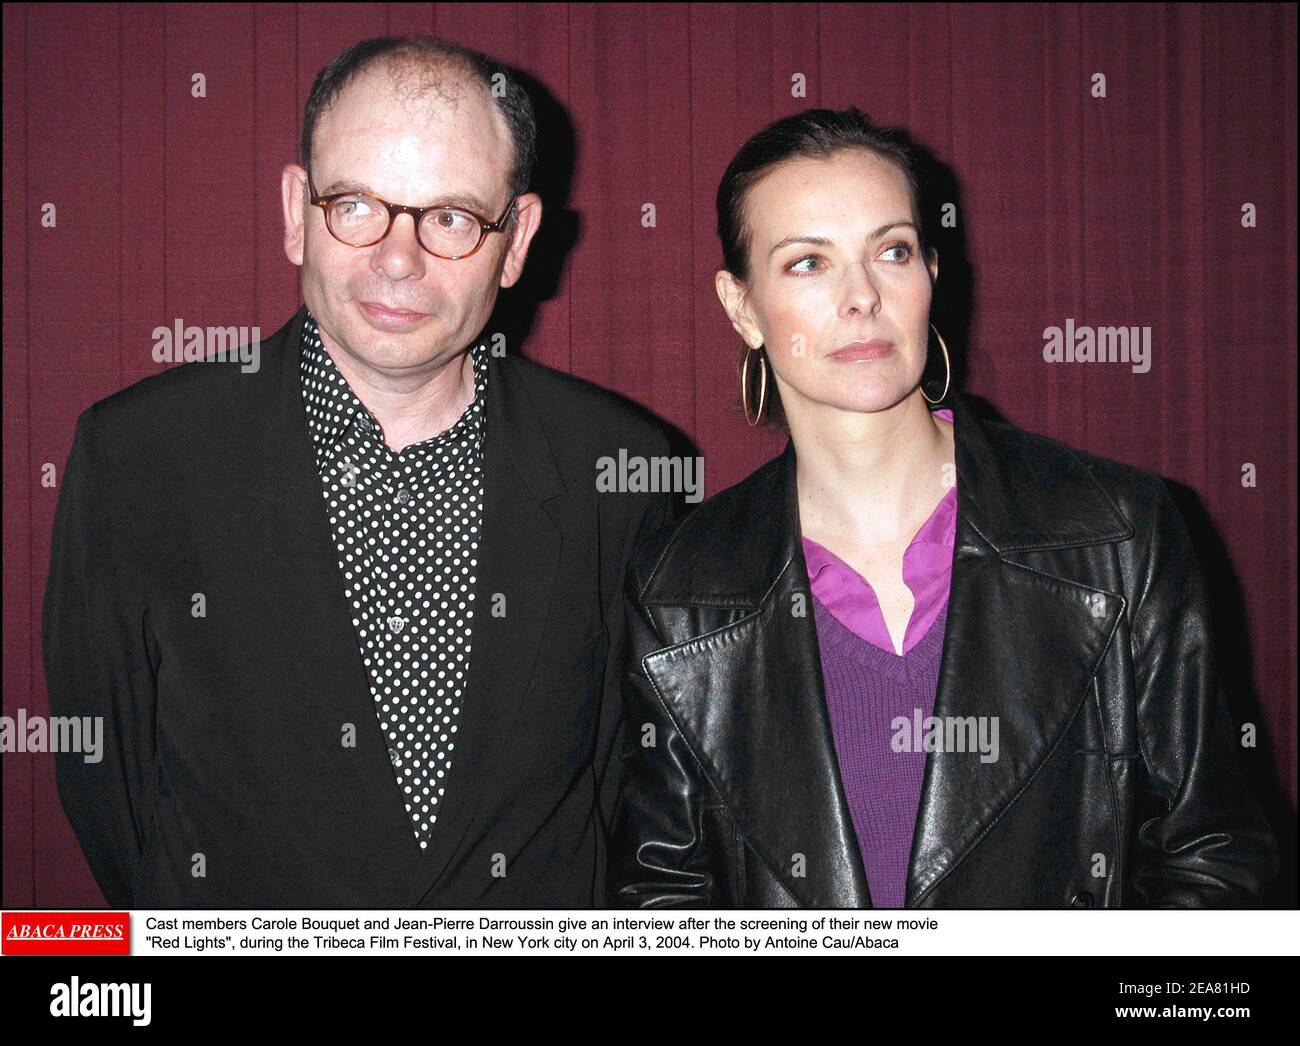 Cast members Carole Bouquet and Jean-Pierre Darroussin give an interview after the screening of their new movie Red Lights, during the Tribeca Film Festival, in New York city on April 3, 2004. Photo by Antoine Cau/Abaca Stock Photo